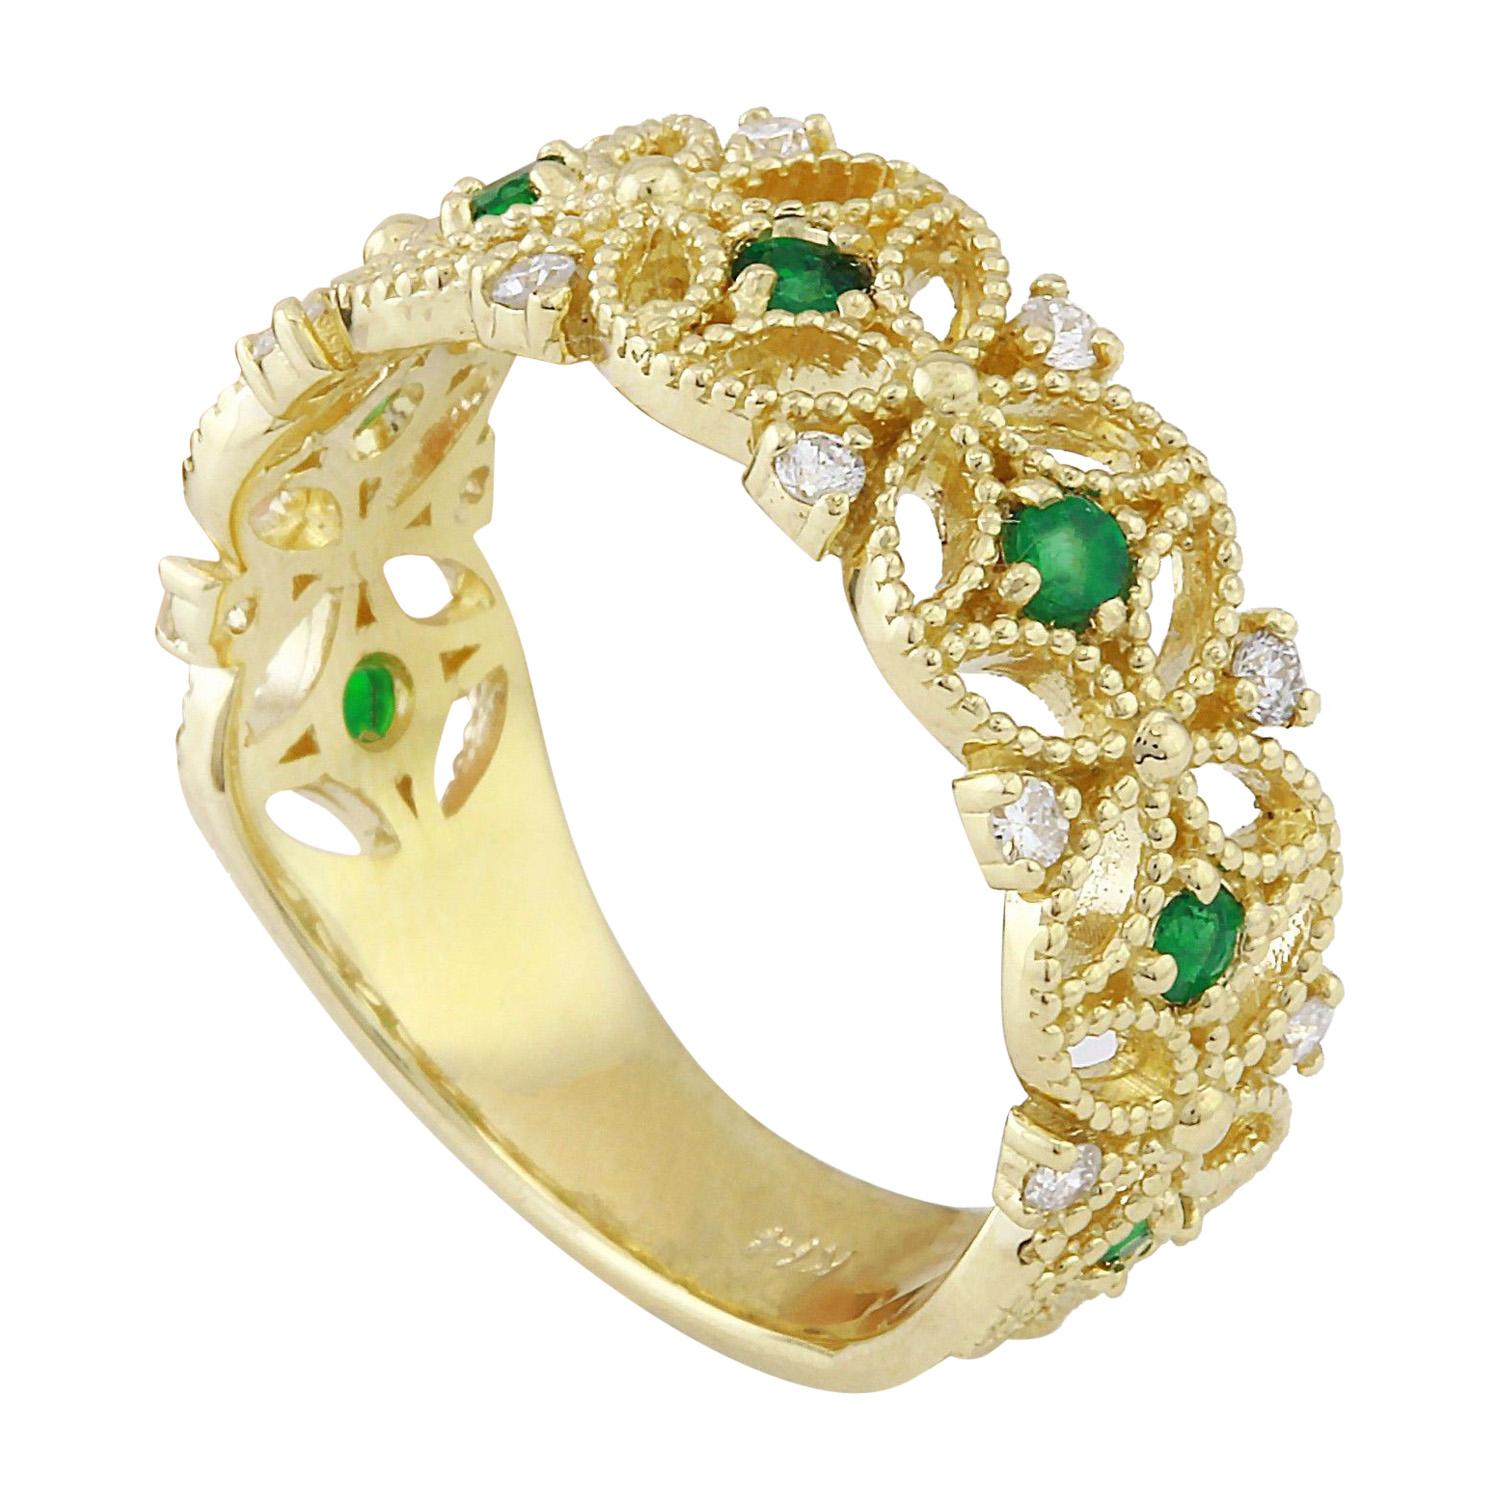 Emerald Diamond Ring In 14 Karat Solid Yellow Gold  In New Condition For Sale In Manhattan Beach, CA